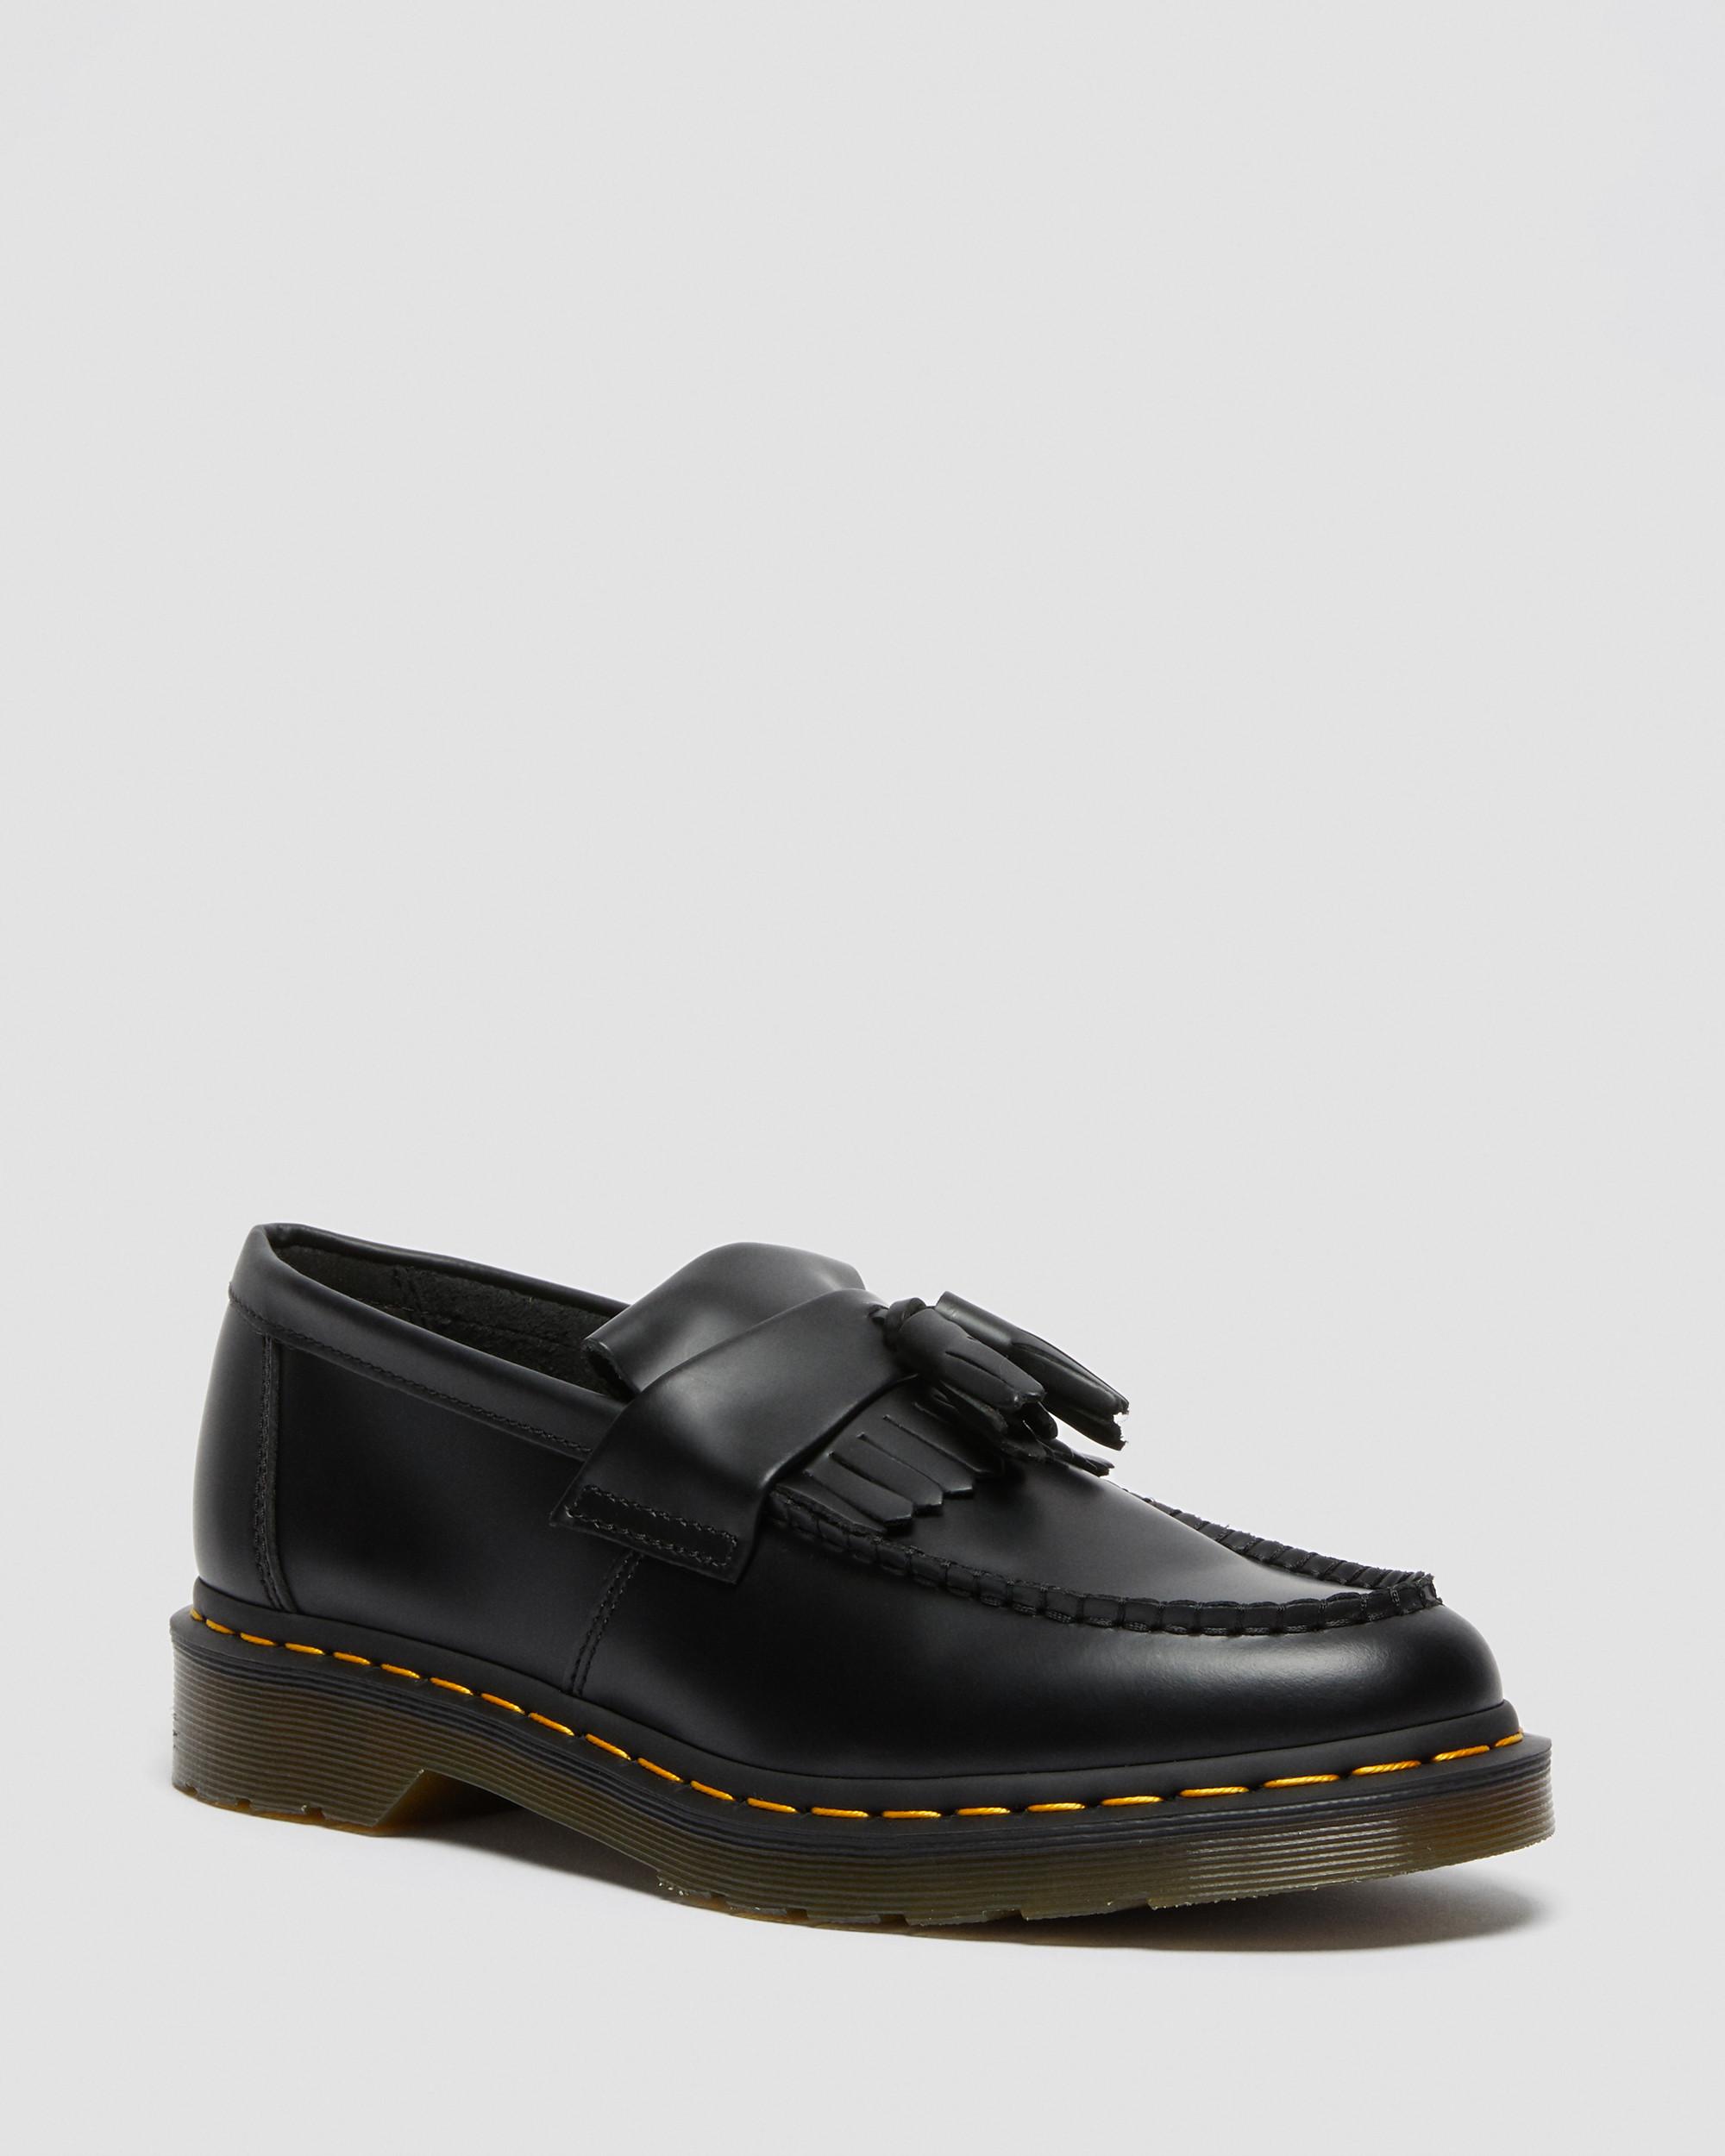 Adrian Yellow Stitch Leather Tassel Loafers | Dr. Martens